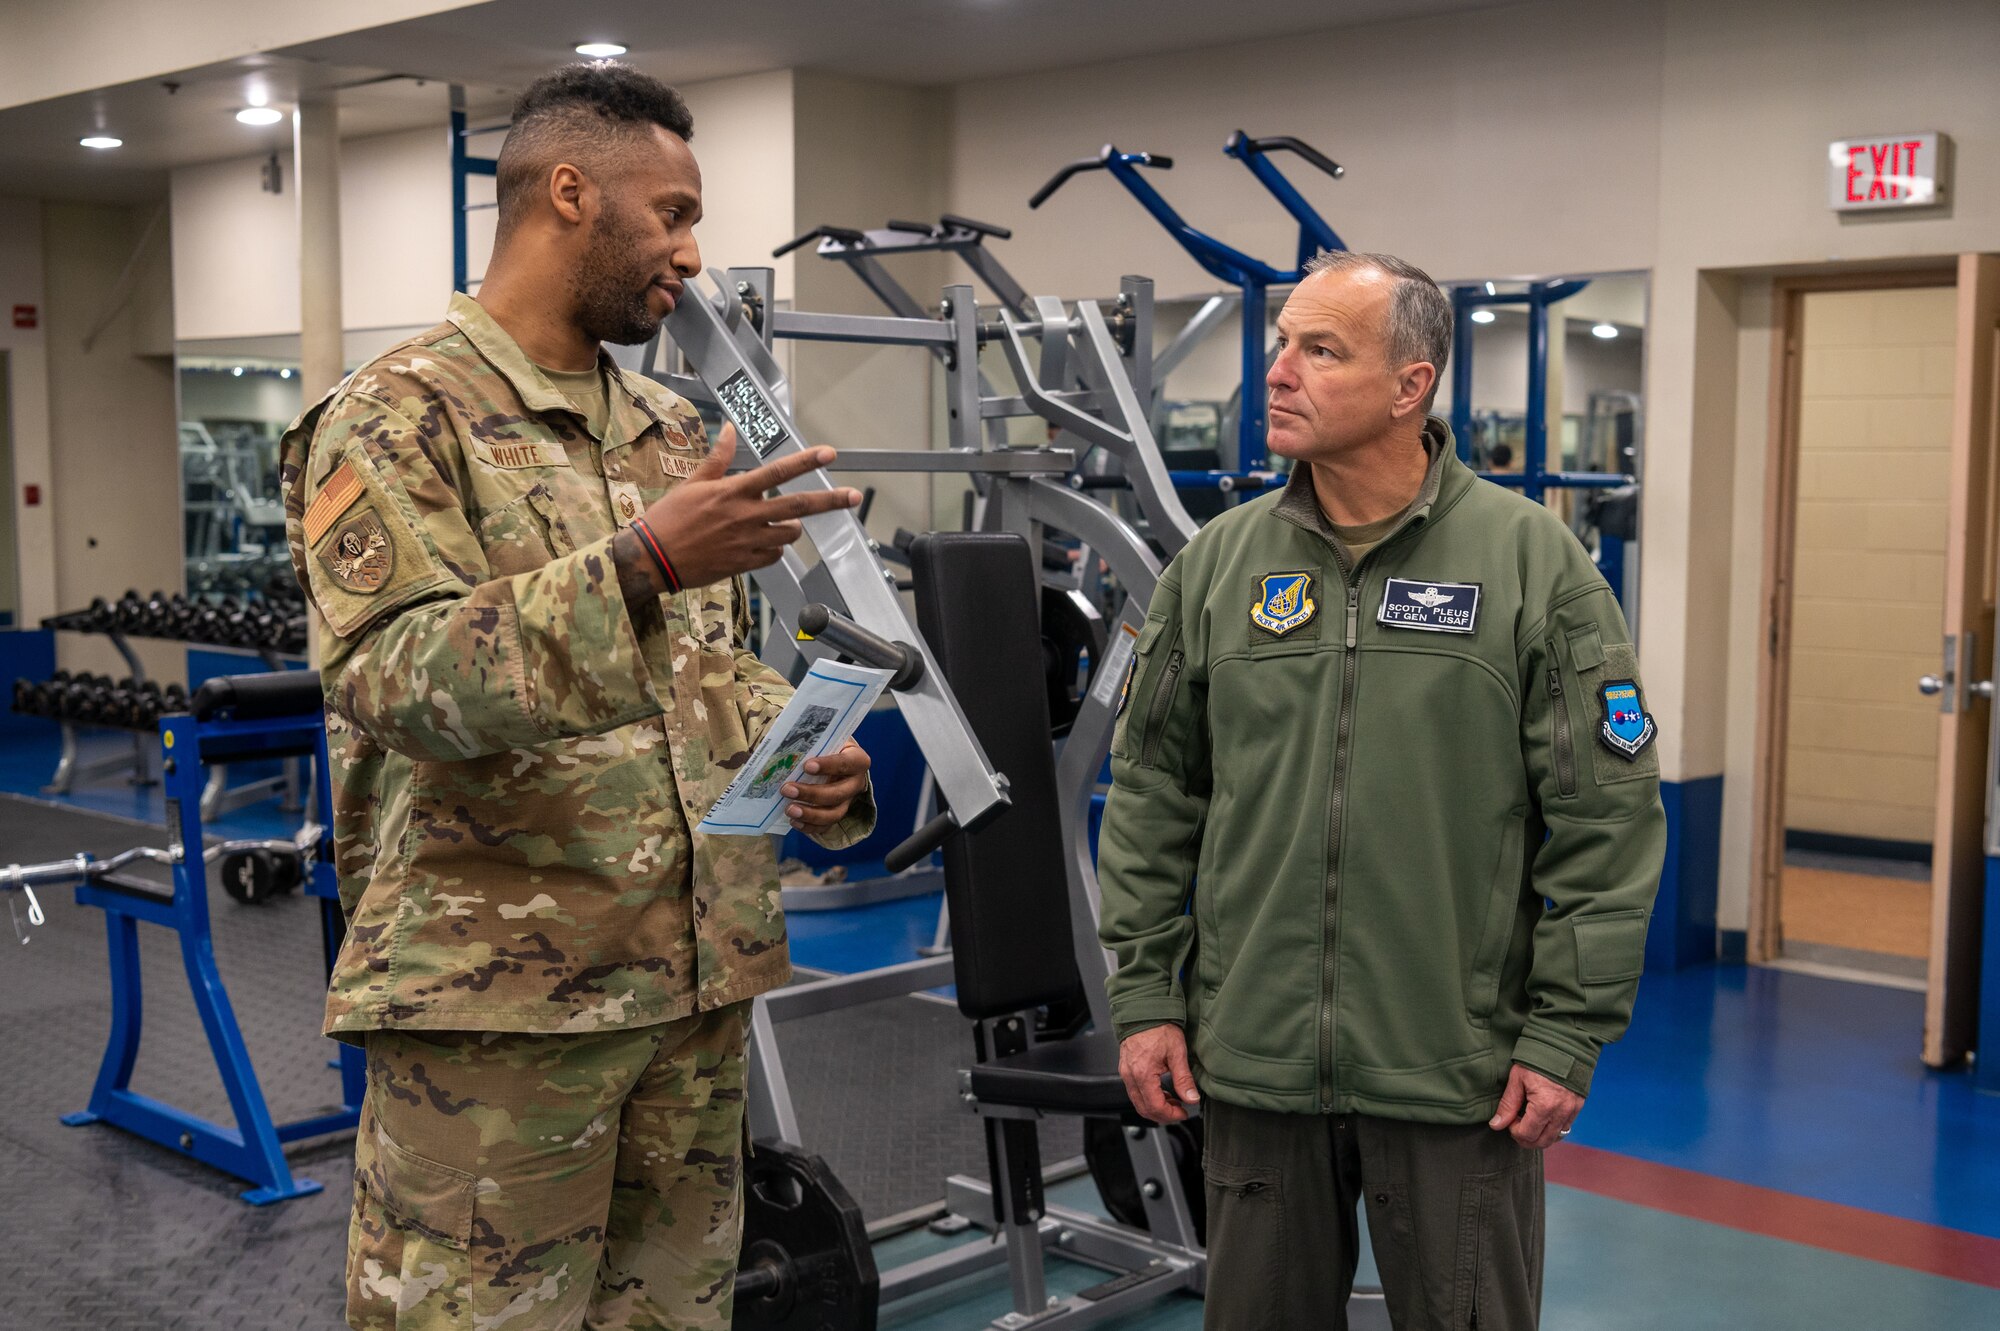 U.S. Air Force Master Sgt. Jeffrey White, 51st Force Support Squadron fitness section chief, gives Lt. Gen. Scott Pleus, 7th Air Force commander a tour of the fitness center at Osan Air Base, Republic of Korea, Nov. 30, 2022.